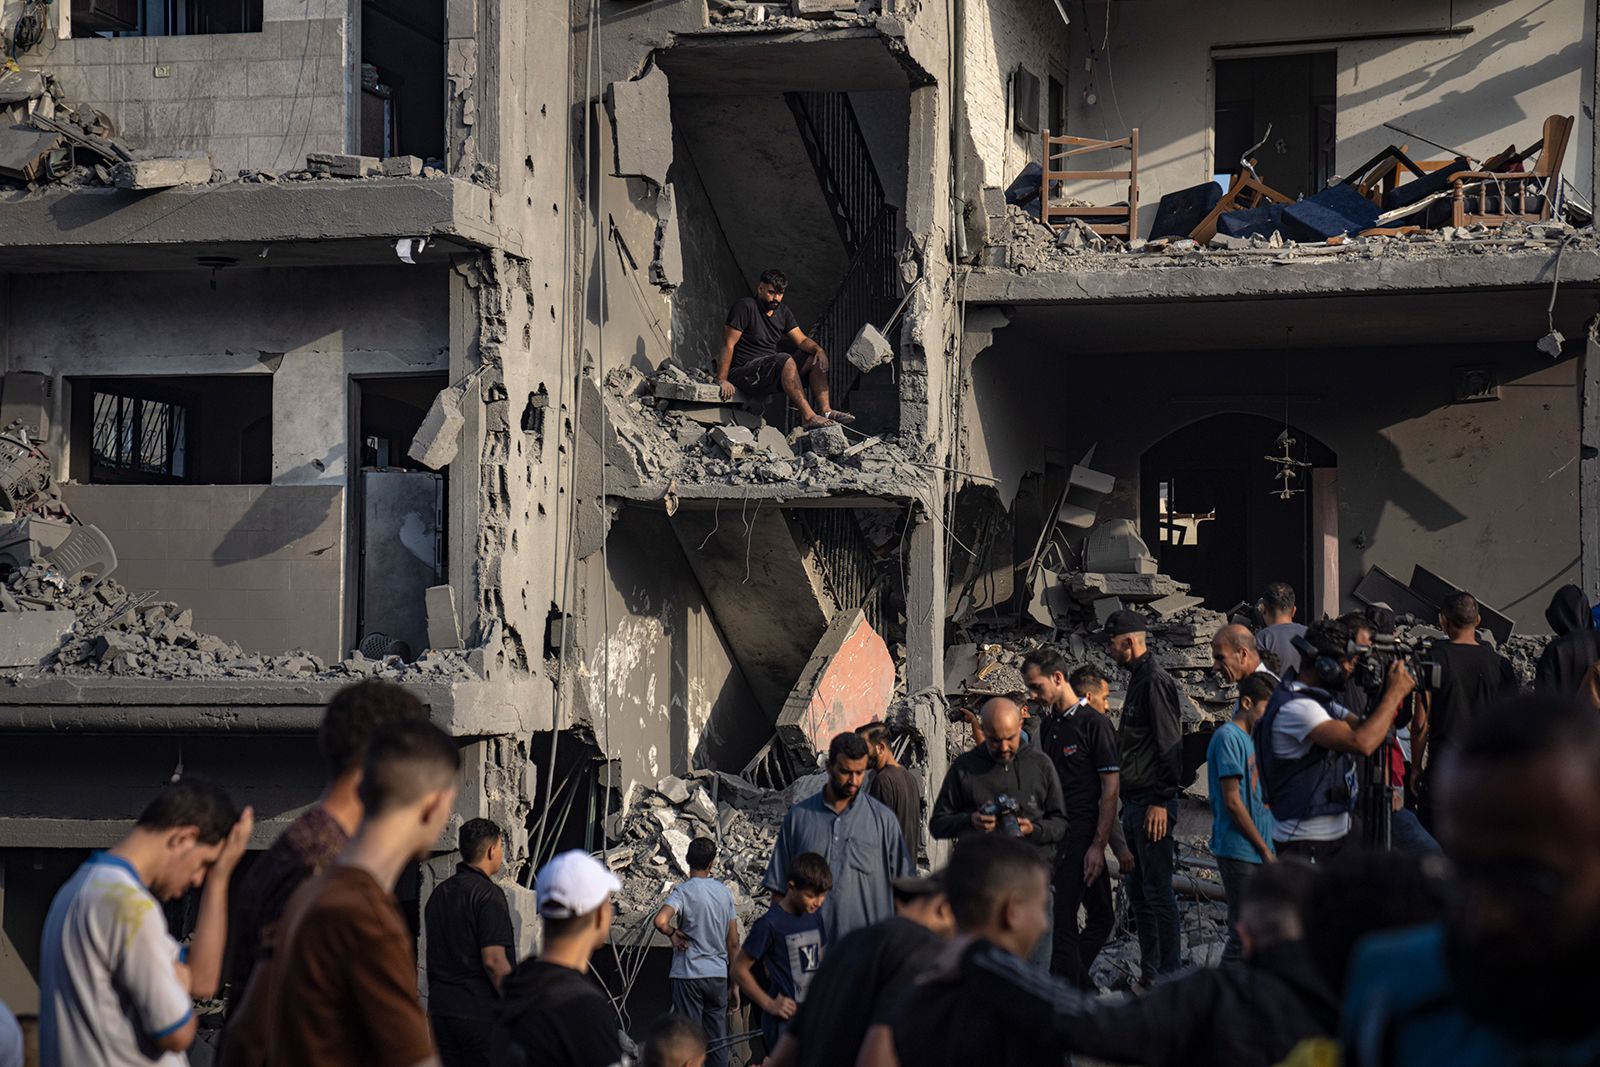 Palestinians look for survivors following an Israeli bombardment in the Al-Maghazi refugee camp, Gaza, on November 5.